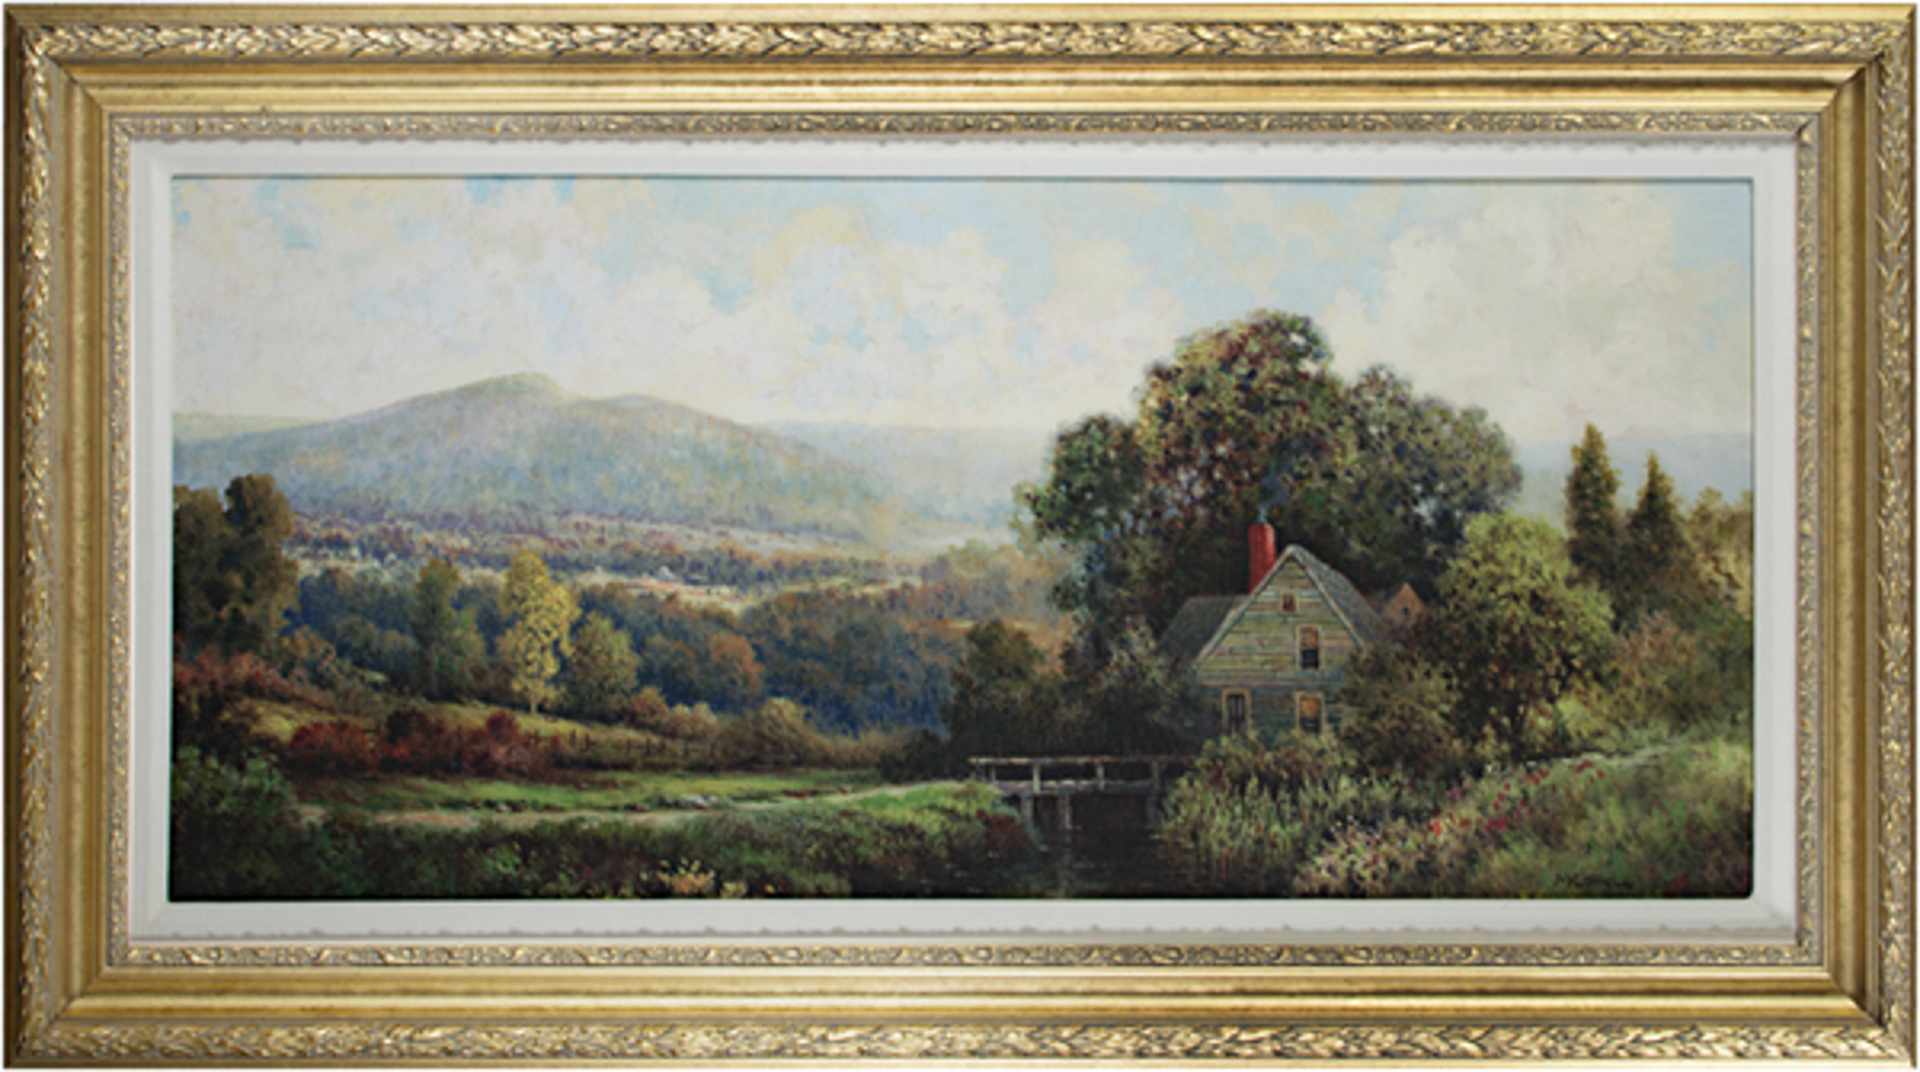 New England Country Cottage by the Stream by Milton H. Lowell (1848-1927)